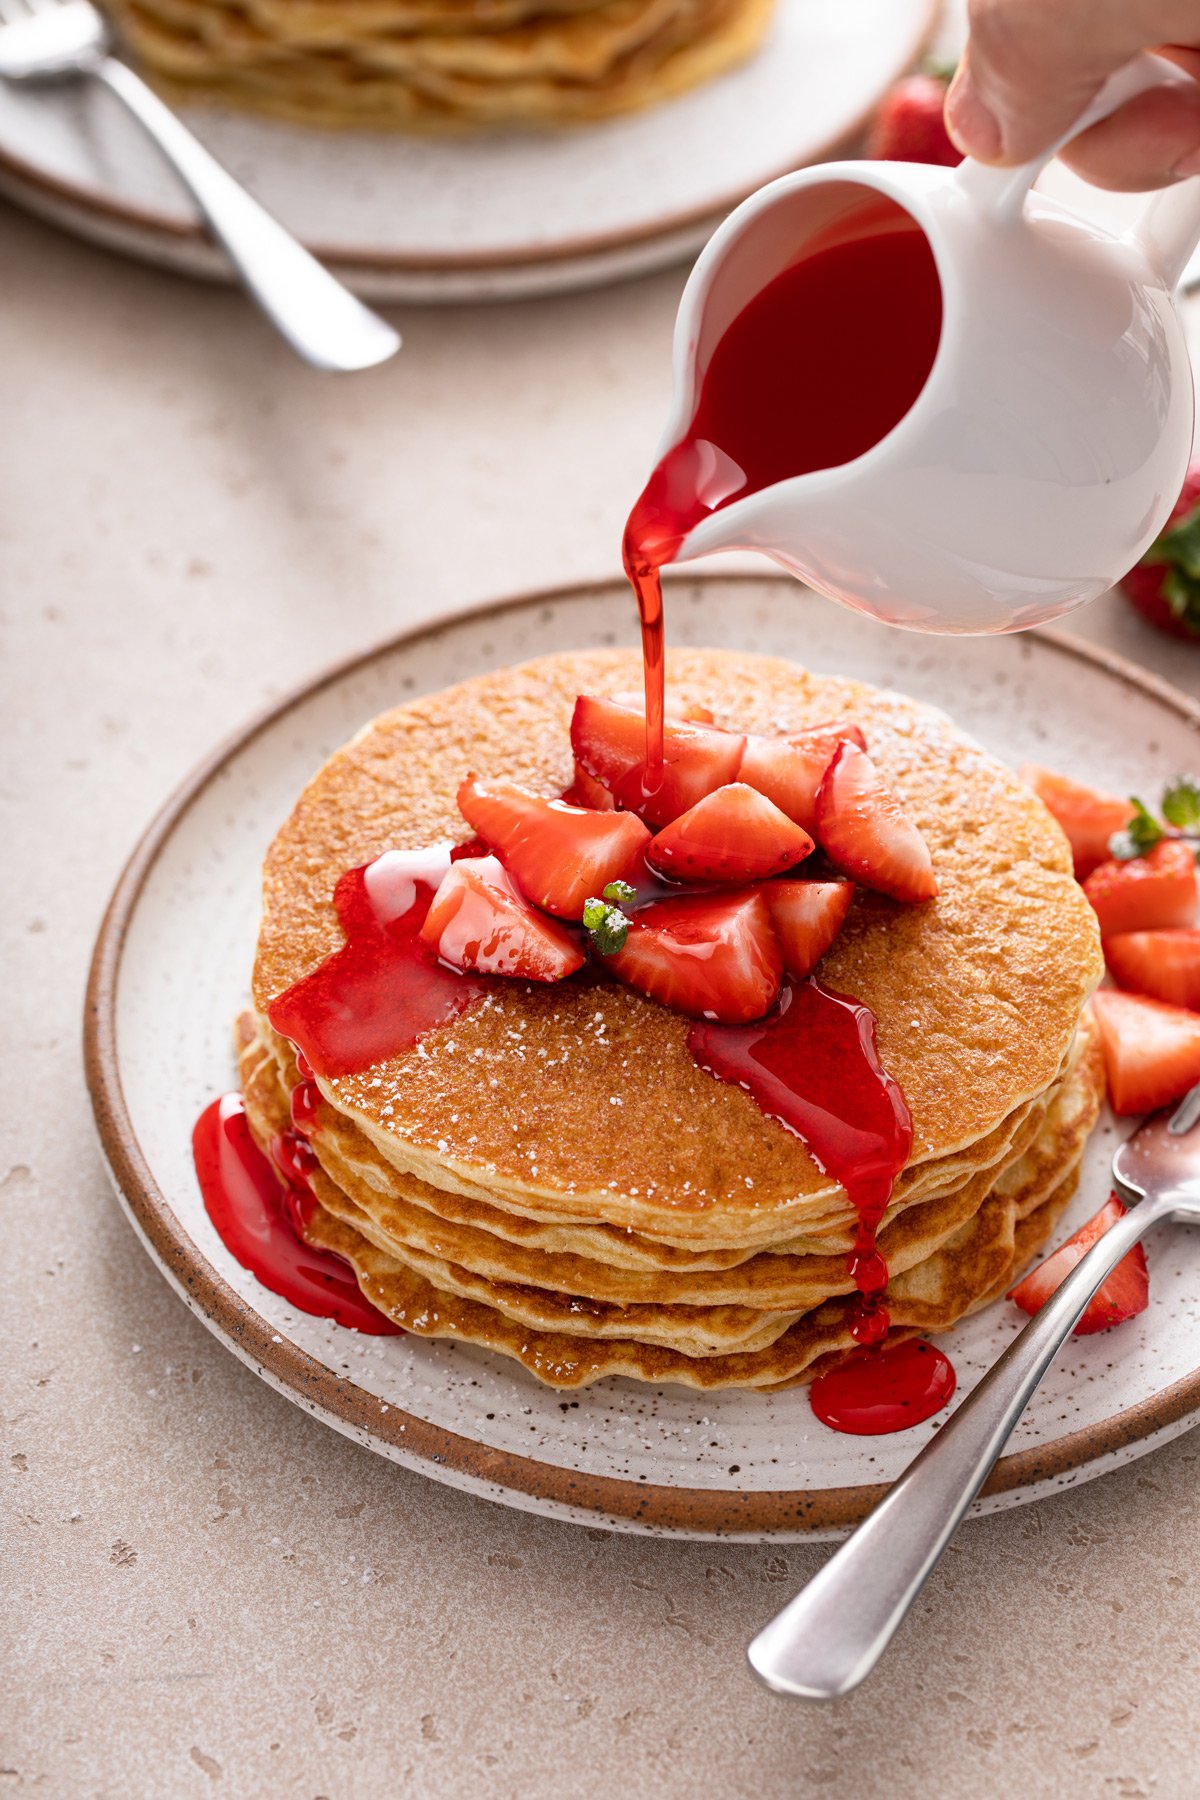 Stack of gluten-free pancakes topped with strawberries on a speckled plate. Strawberry syrup is being poured over the pancakes.